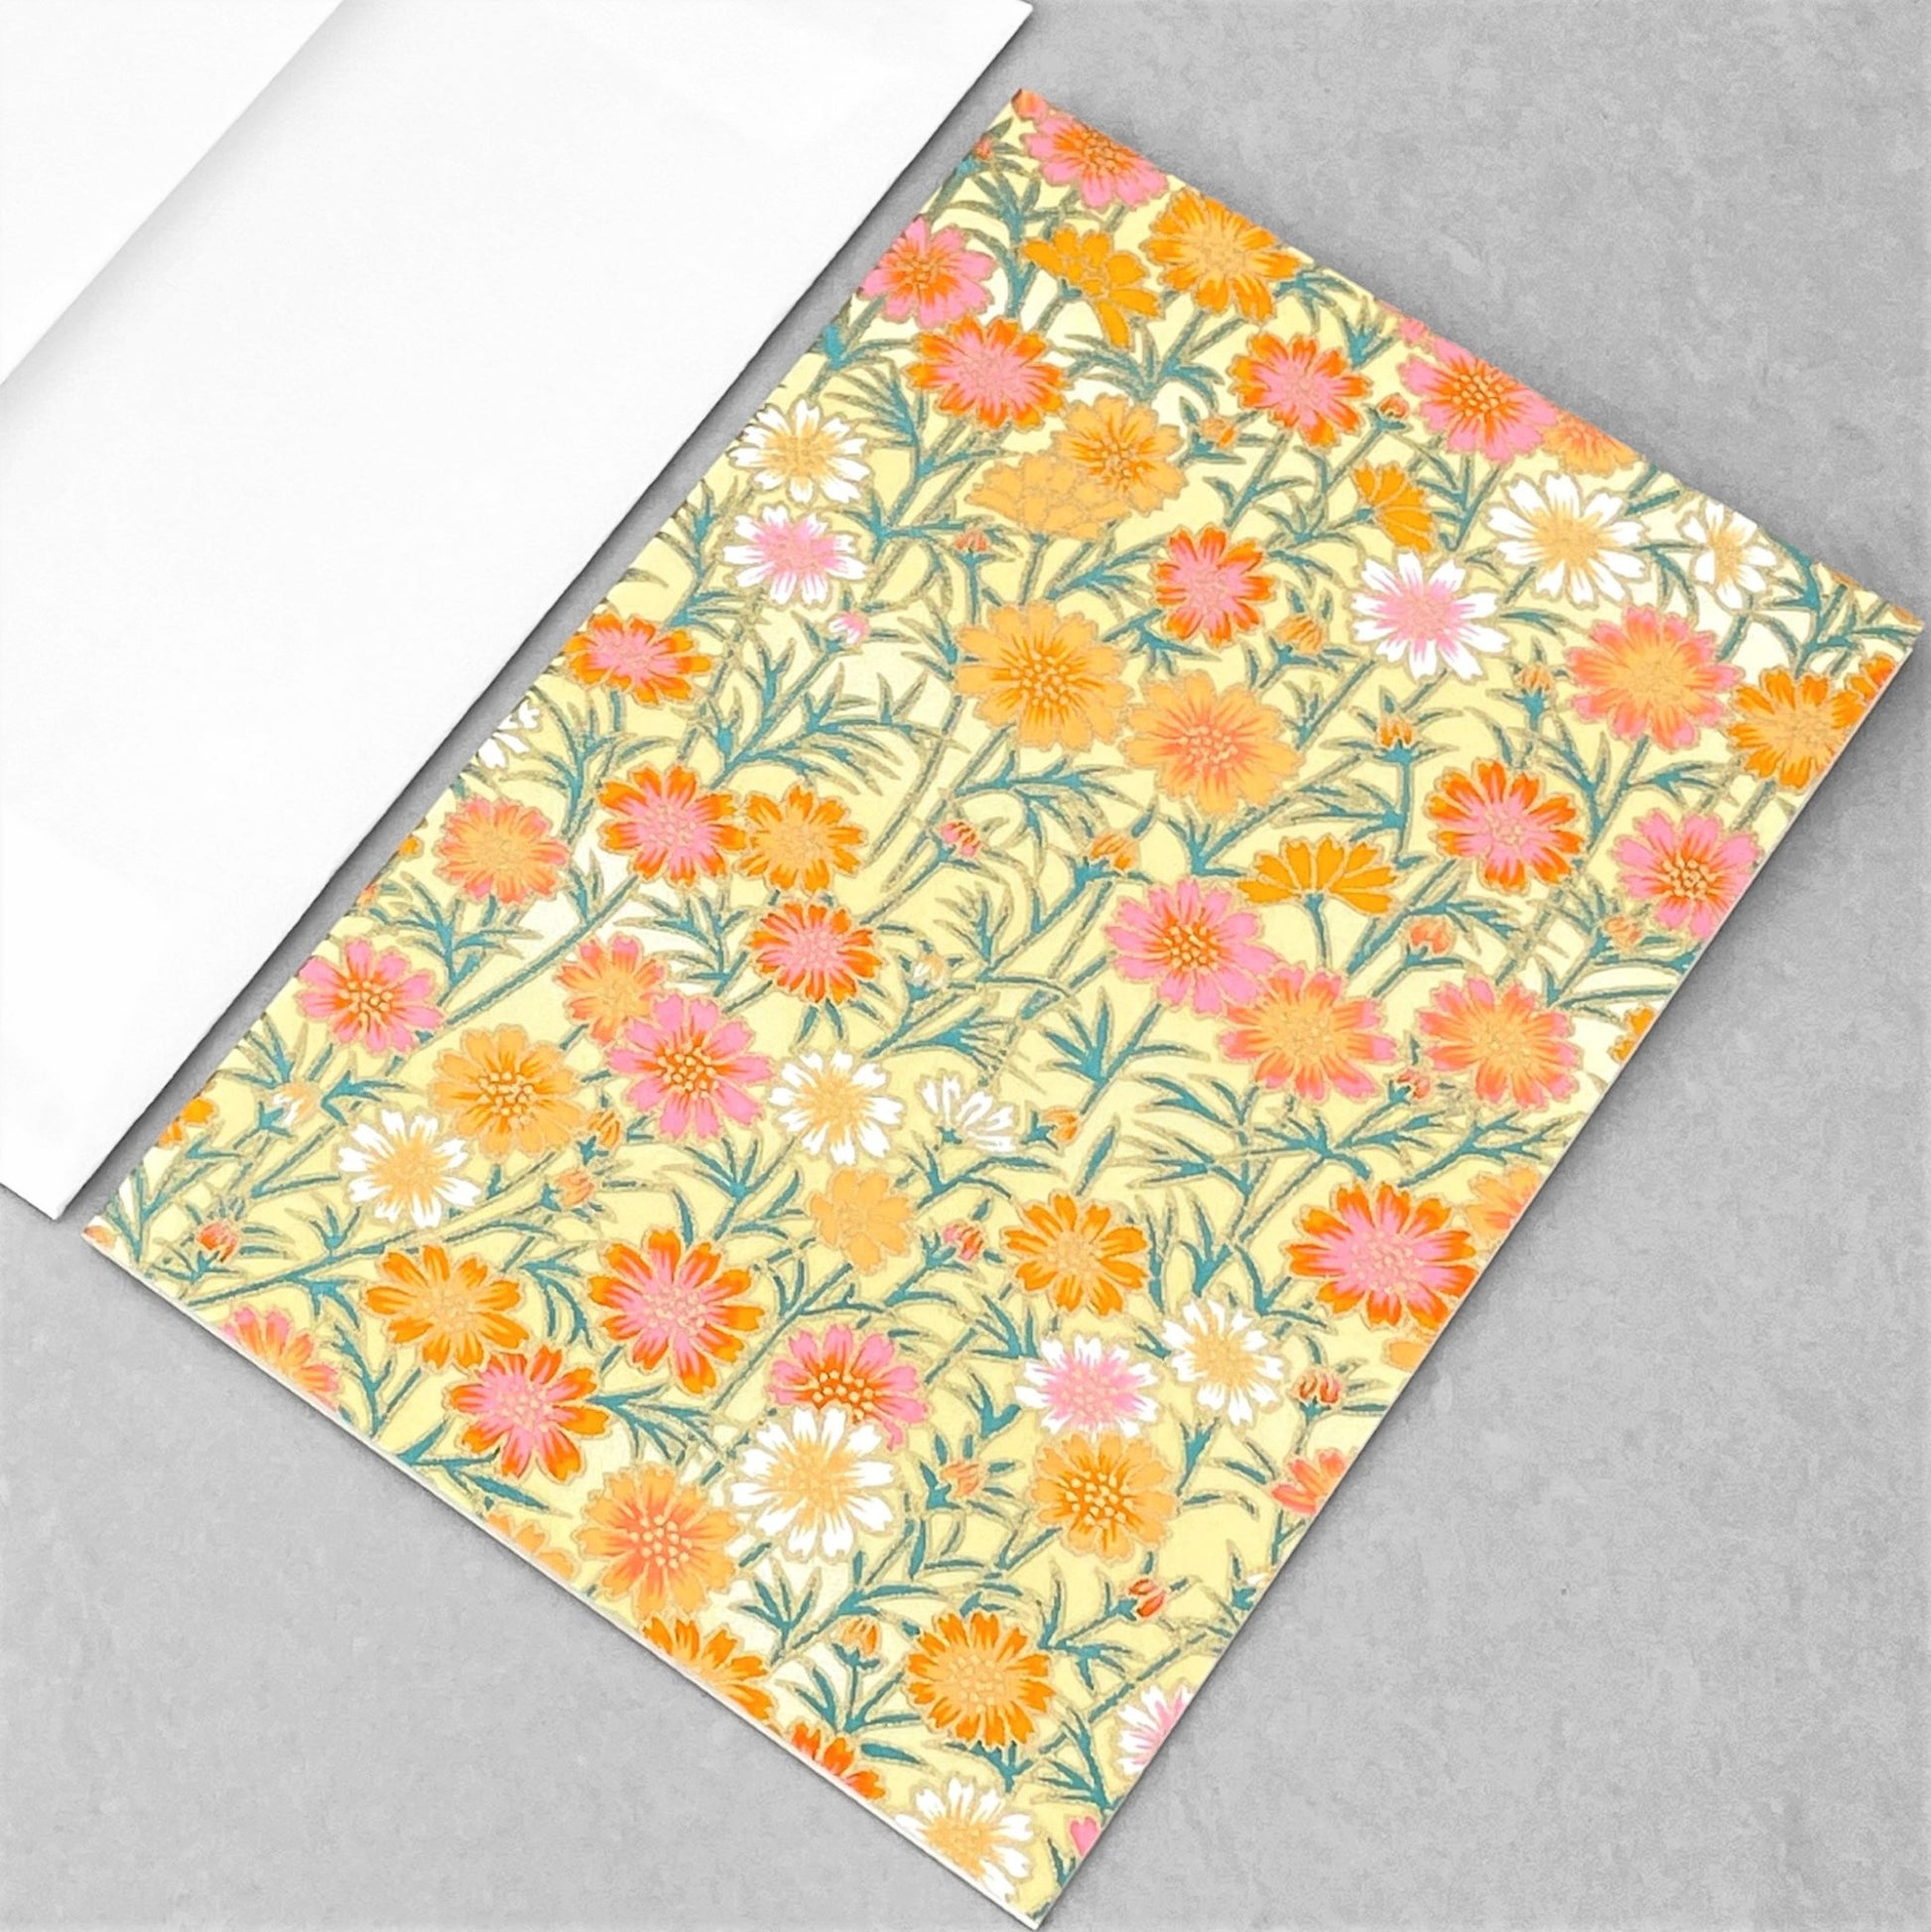 japanese silk-screen printed greetings card with repeat daisy pattern in yellow, pink and orange by Esmie